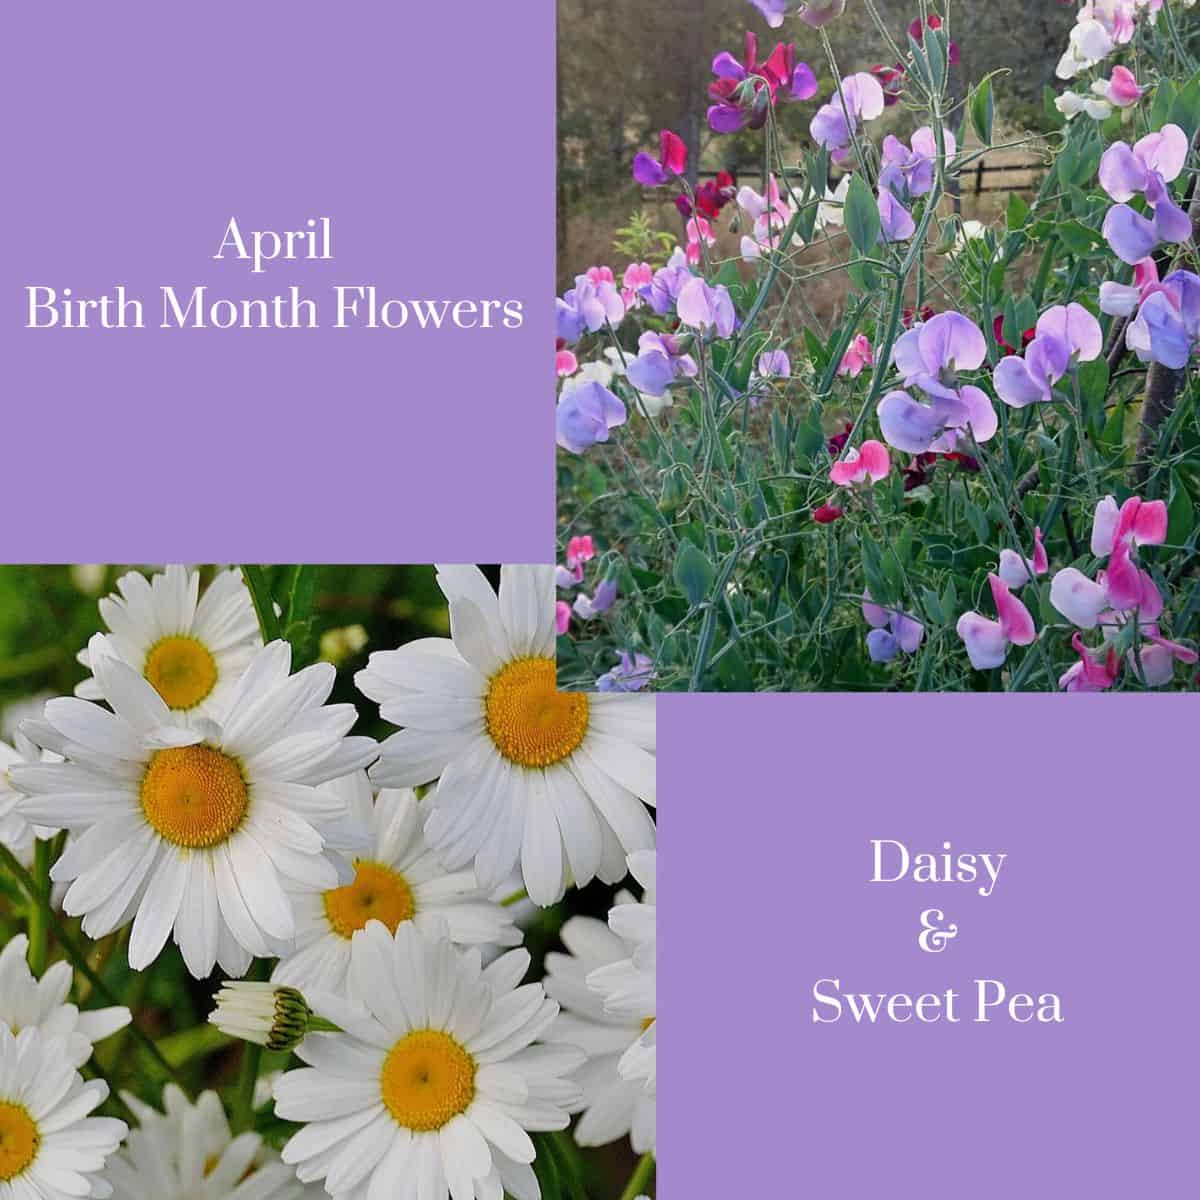 a graphic stating april birth month flowers daisy and sweet pea with photos of the flowers